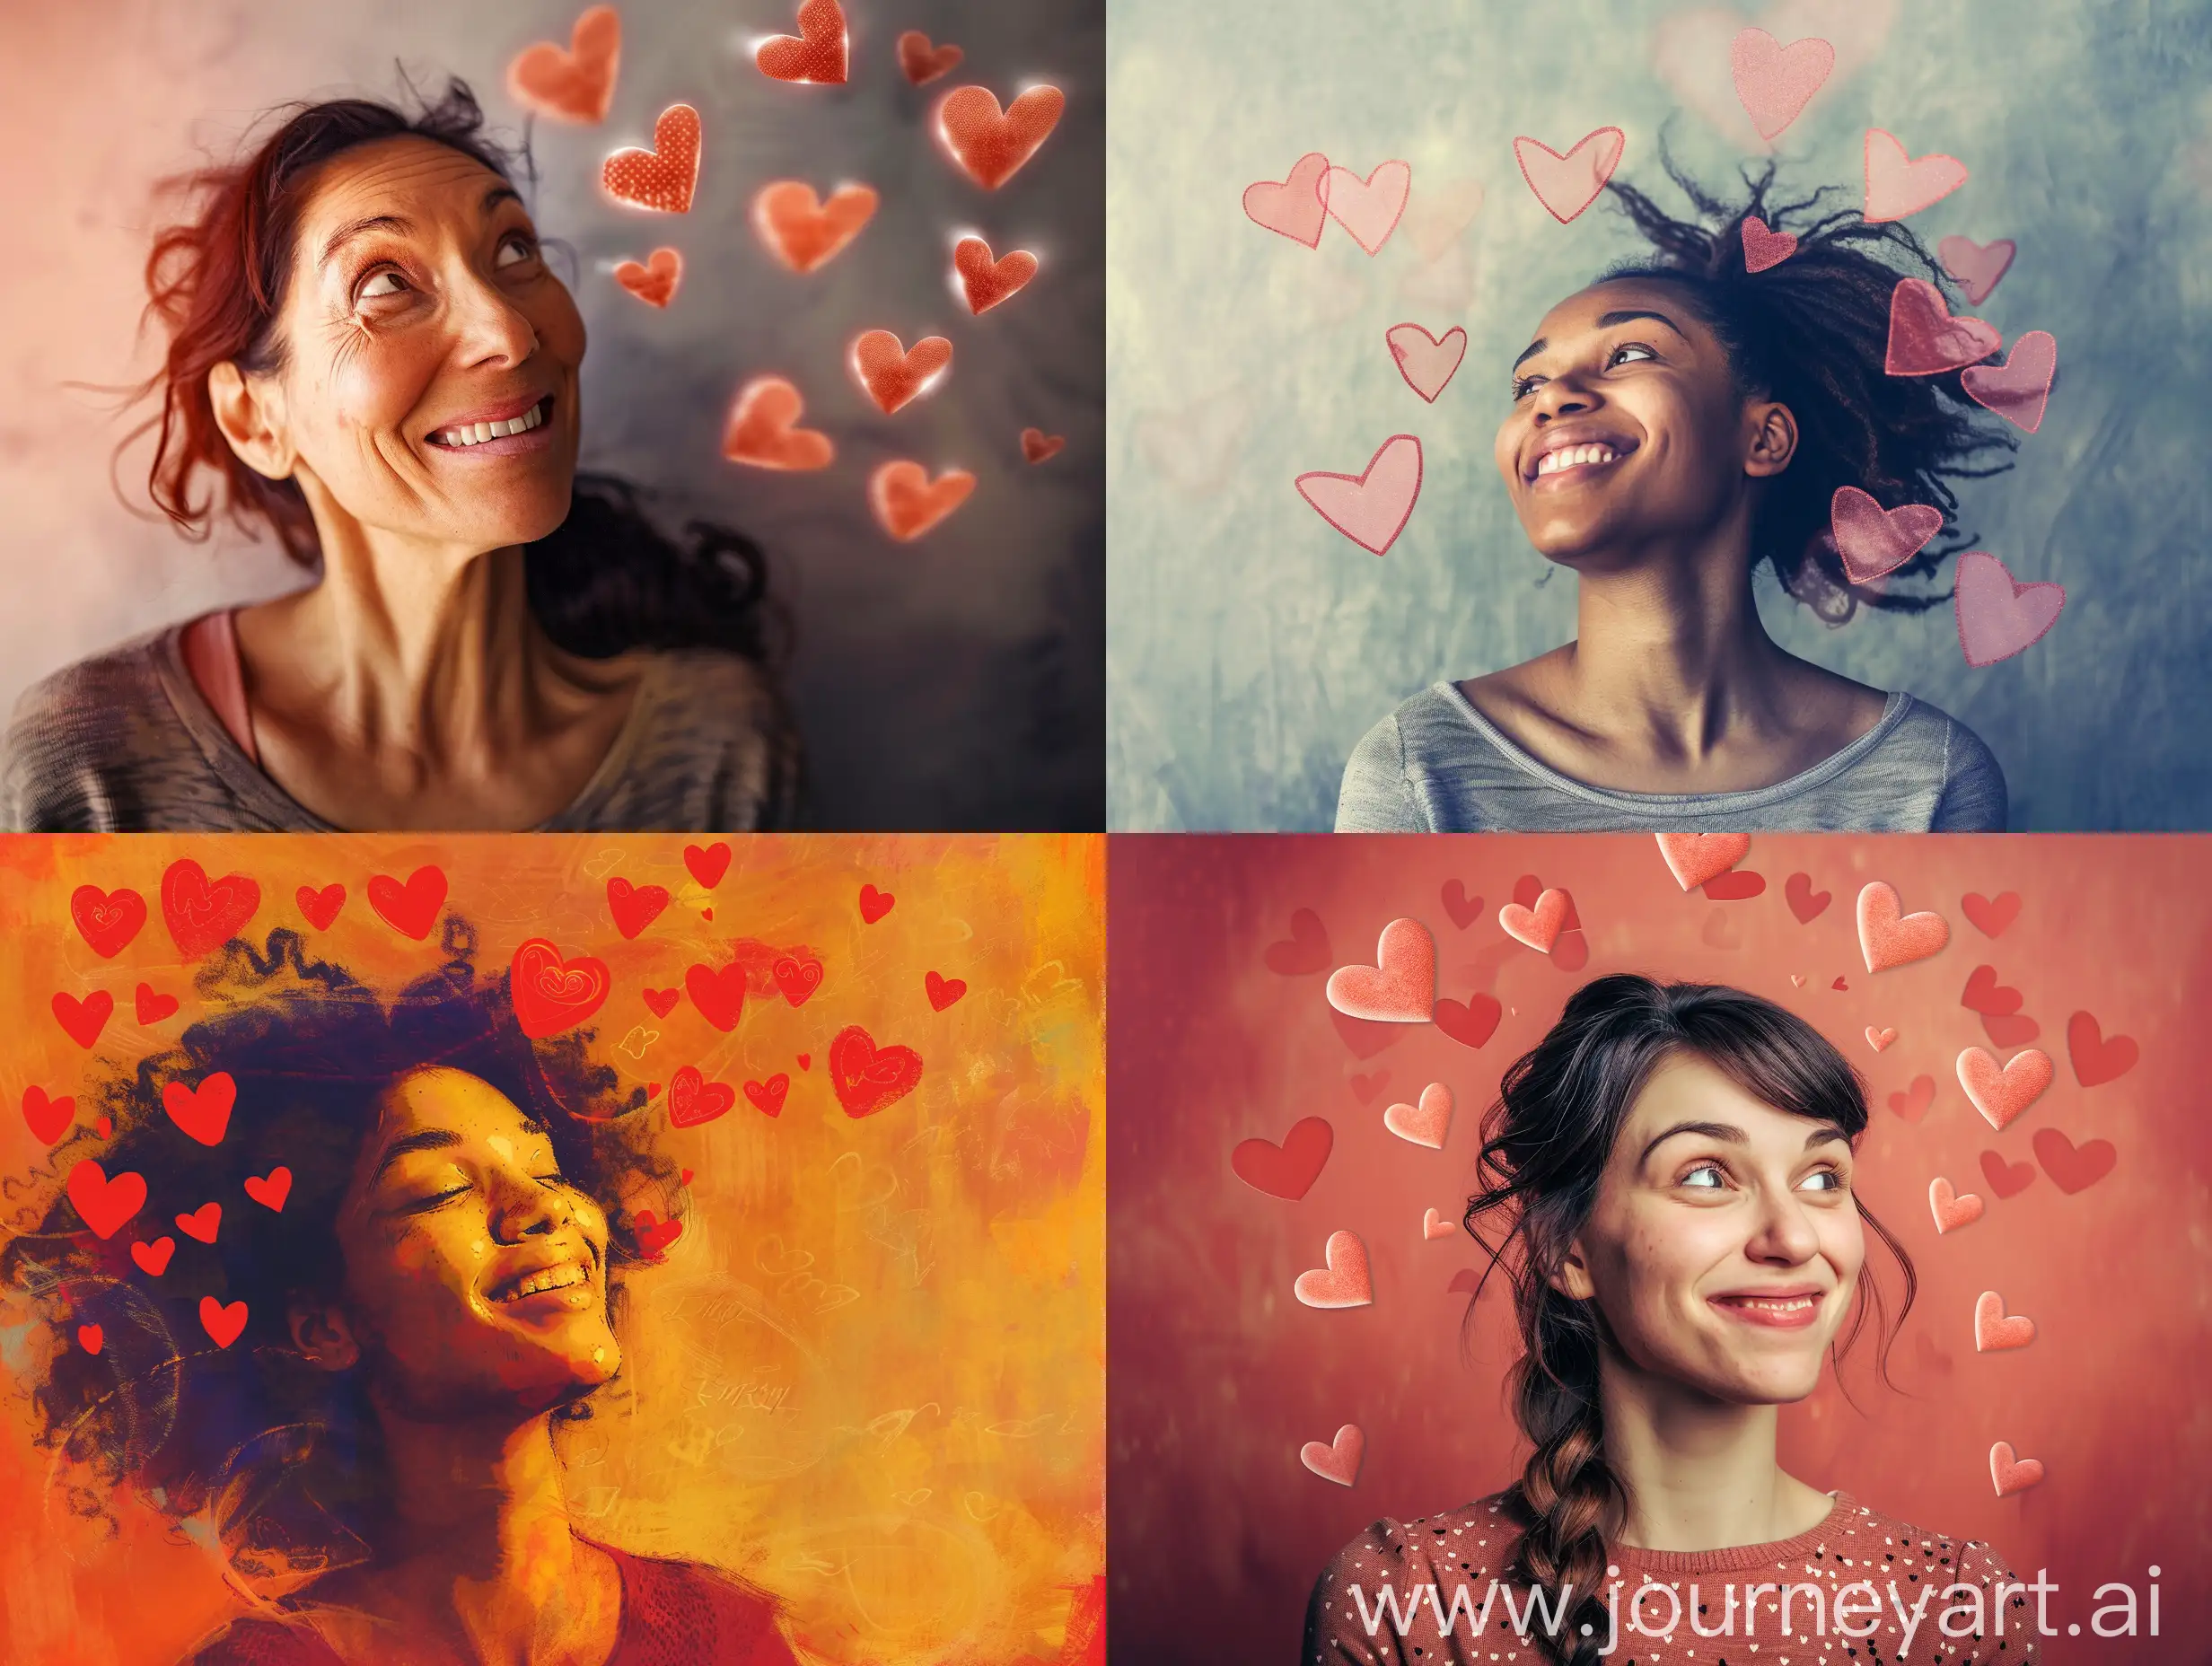 portrait of a woman with an expression of joy and delight on her face and hearts swirling above her for valentine's day